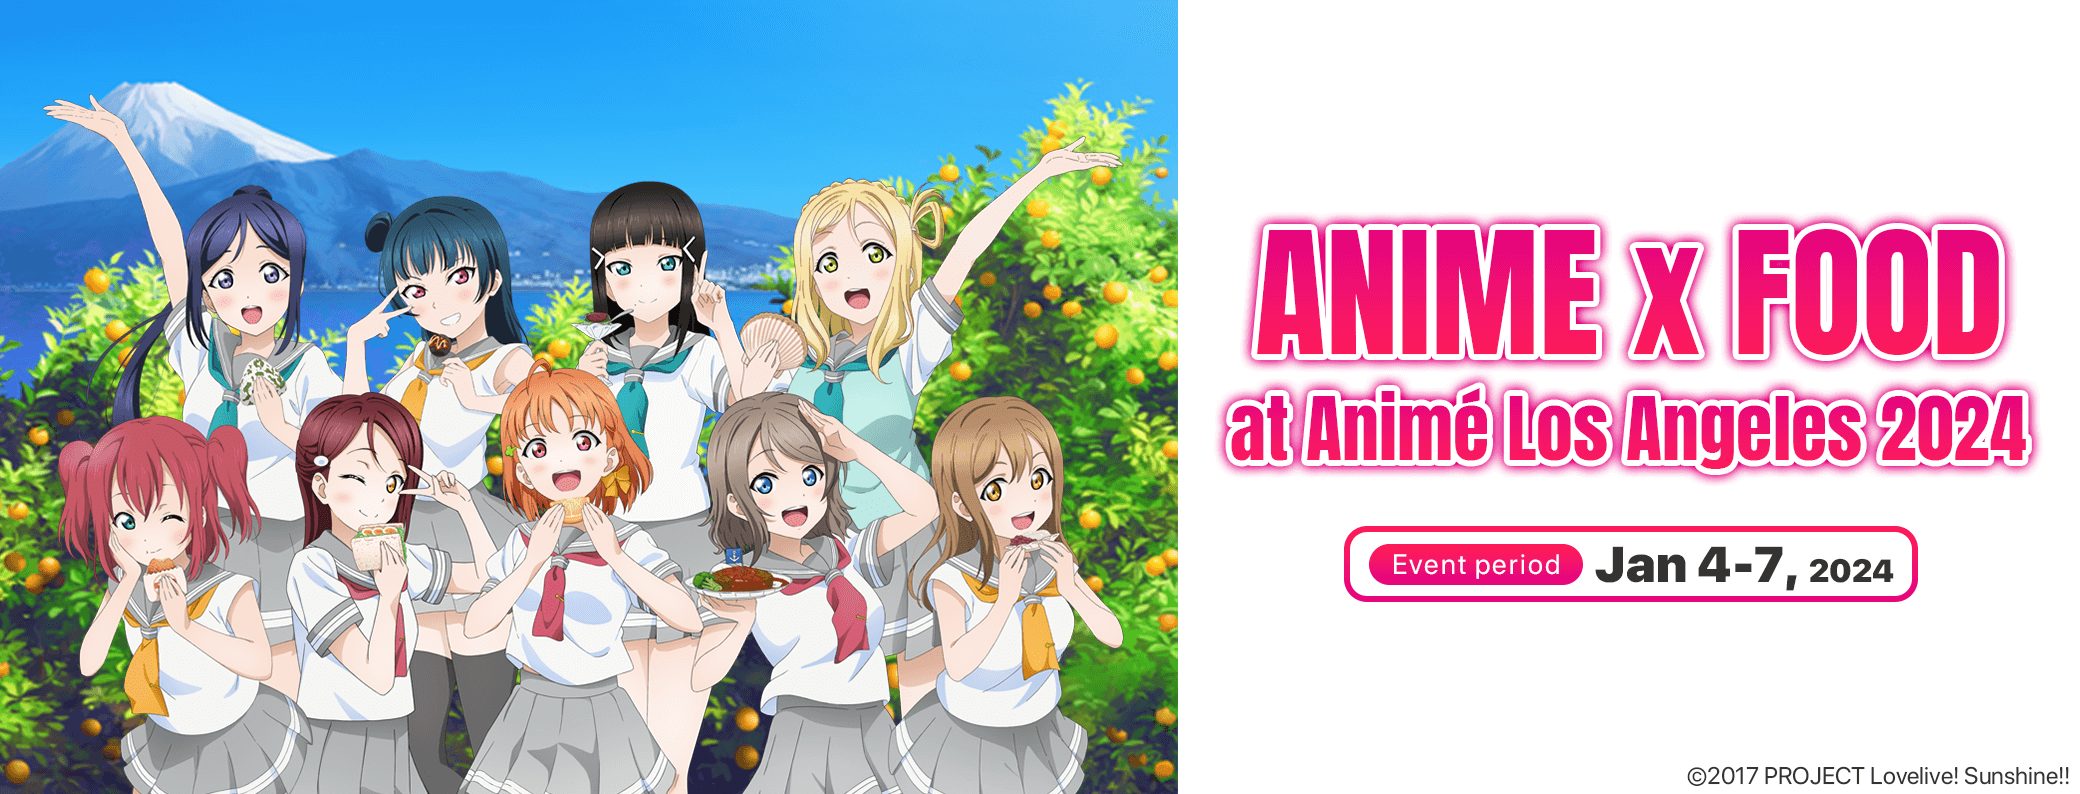 Anime x Food event at Animé Los Angeles 2024 - Don’t miss the fun!